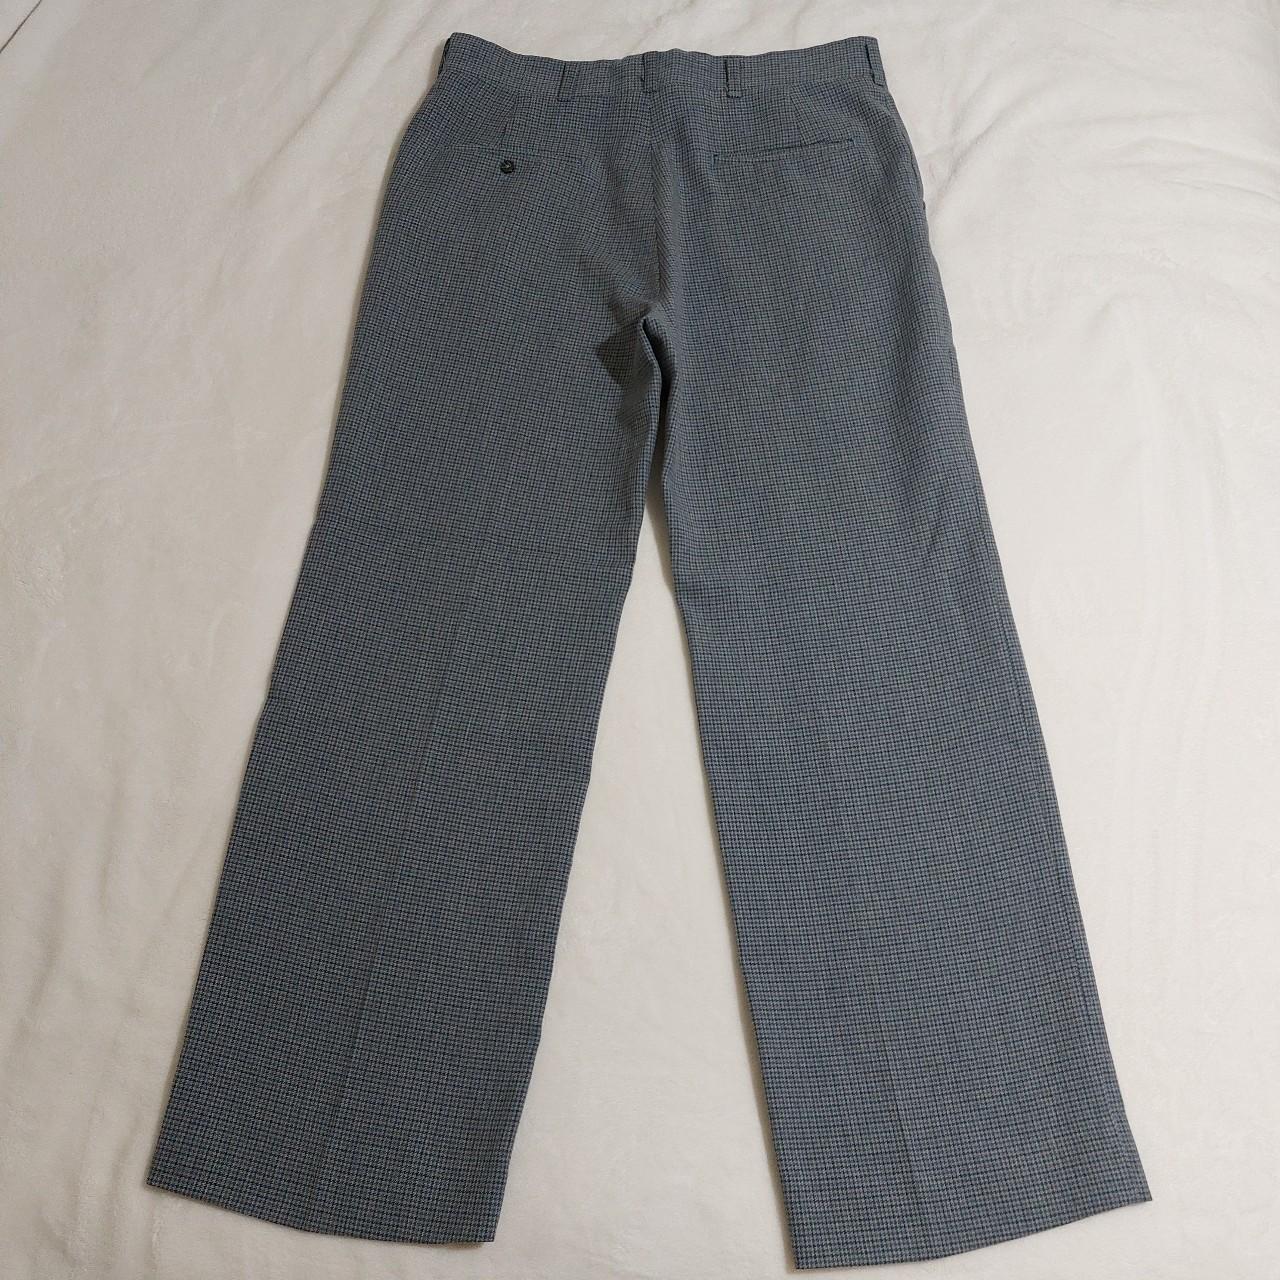 Haggar Men's Grey and Blue Trousers (4)